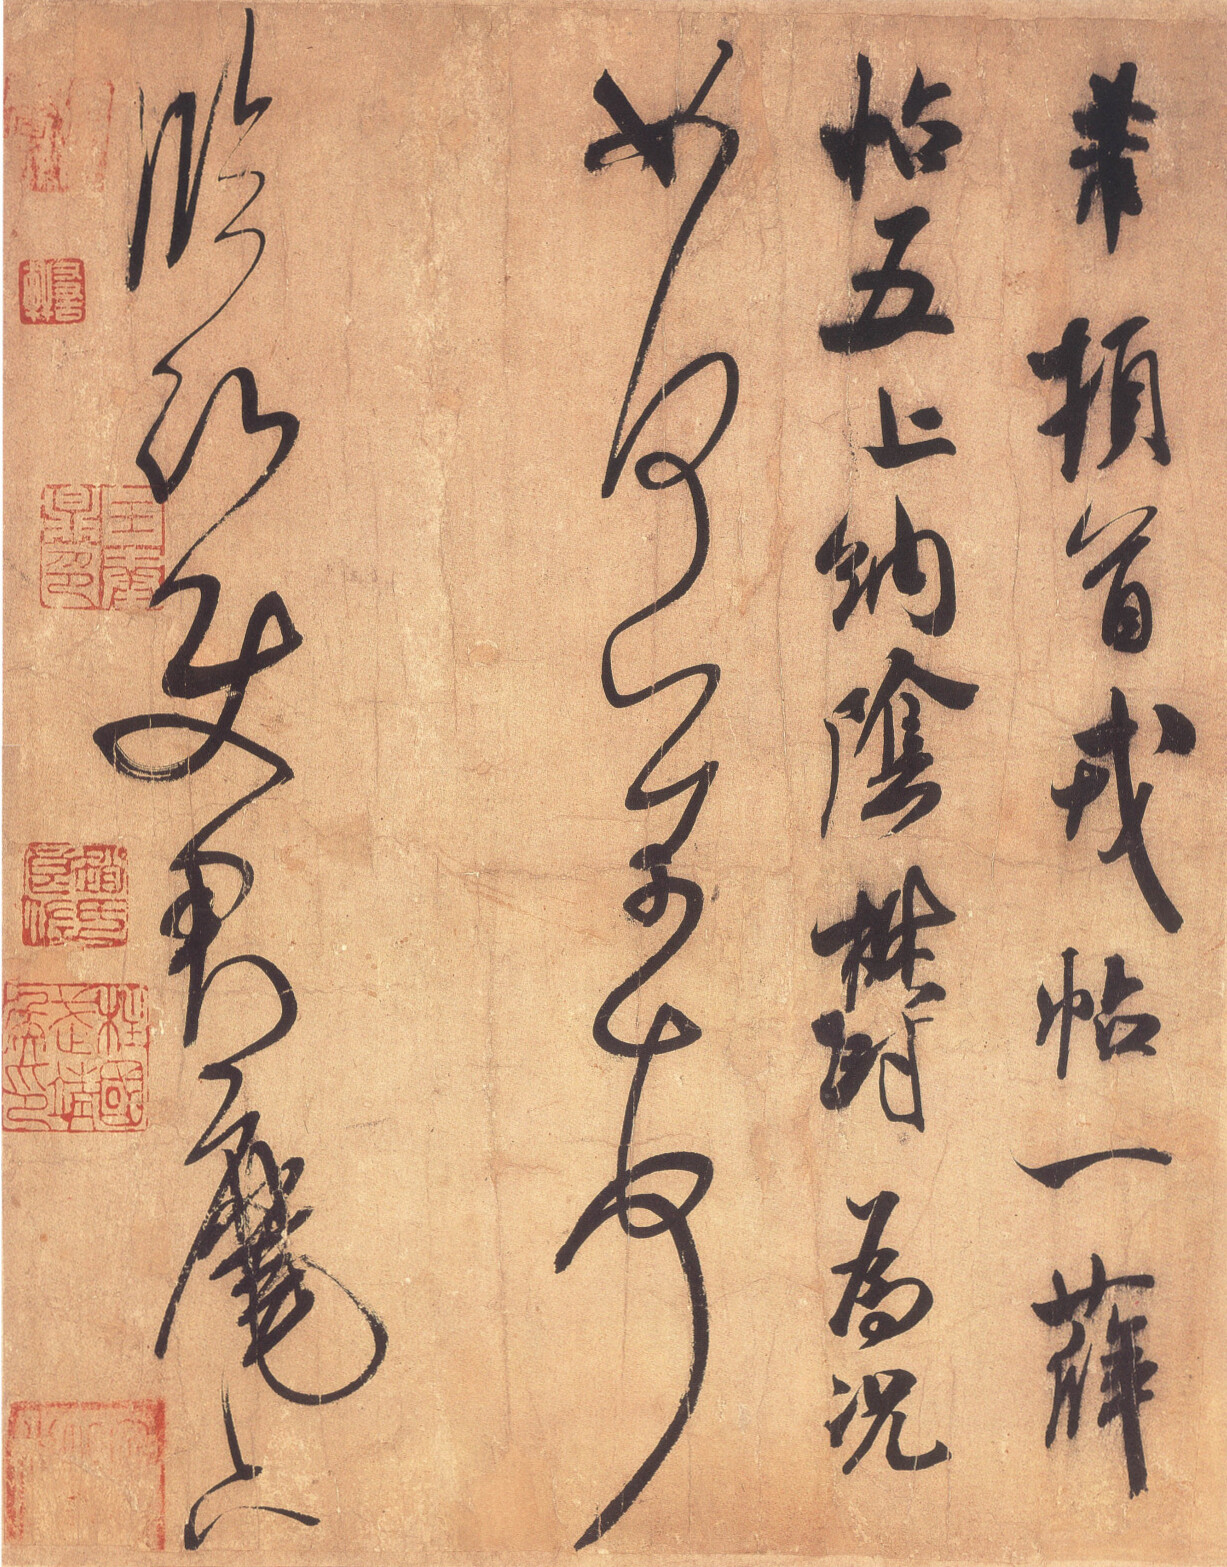 Four lines of vertically oriented Chinese characters. The two on the left are formed from a continuous line, the calligraphy equivalent of cursive. The two on the right use a more traditional multiple stroke writing style.